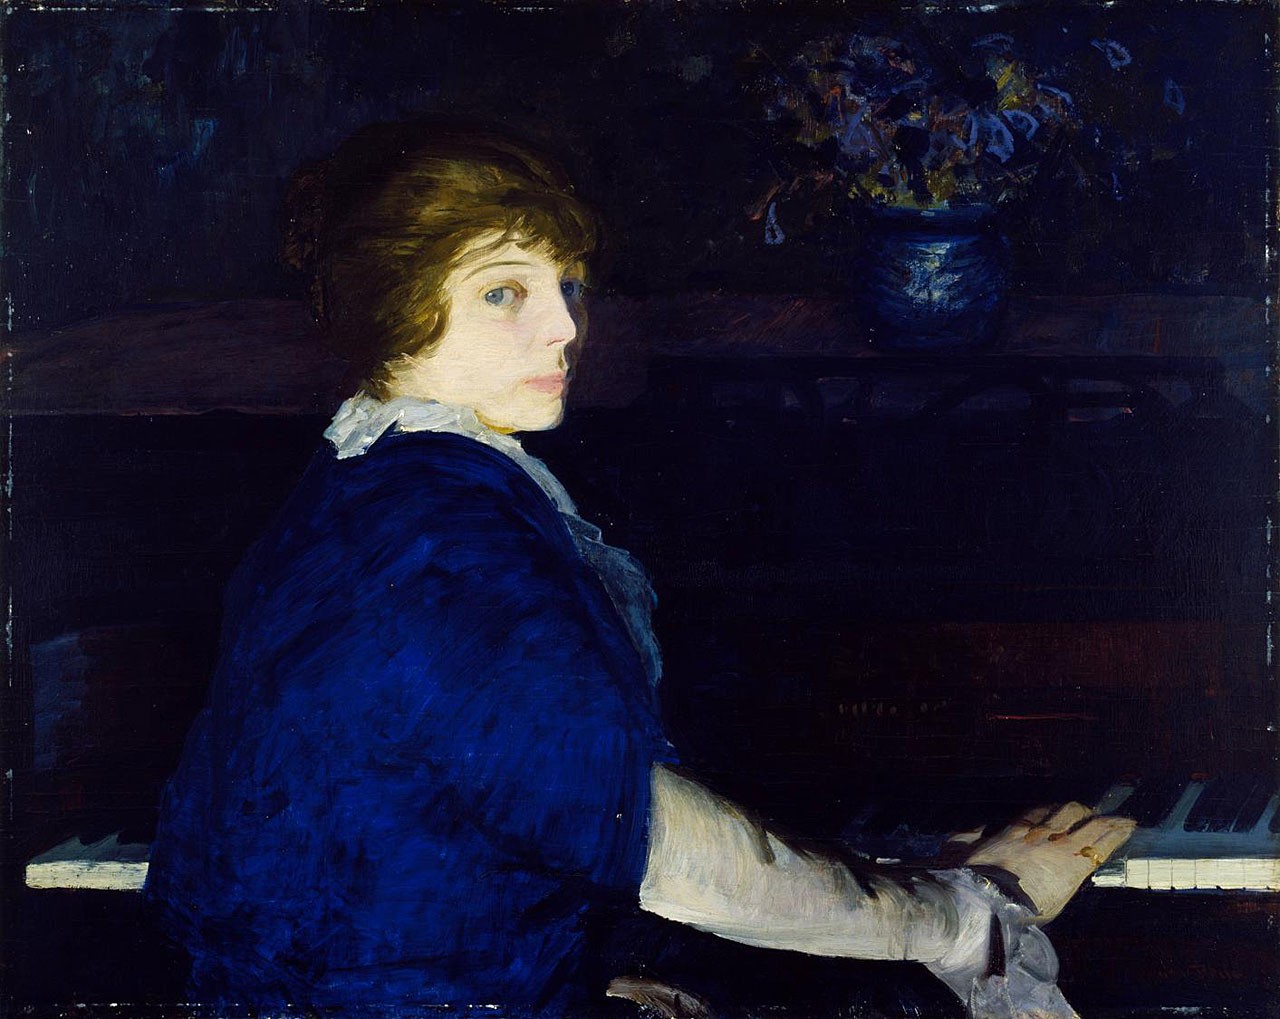 Emma at the Piano by George Bellows - 1914 - 73 x 94 cm Chrysler Museum of Art